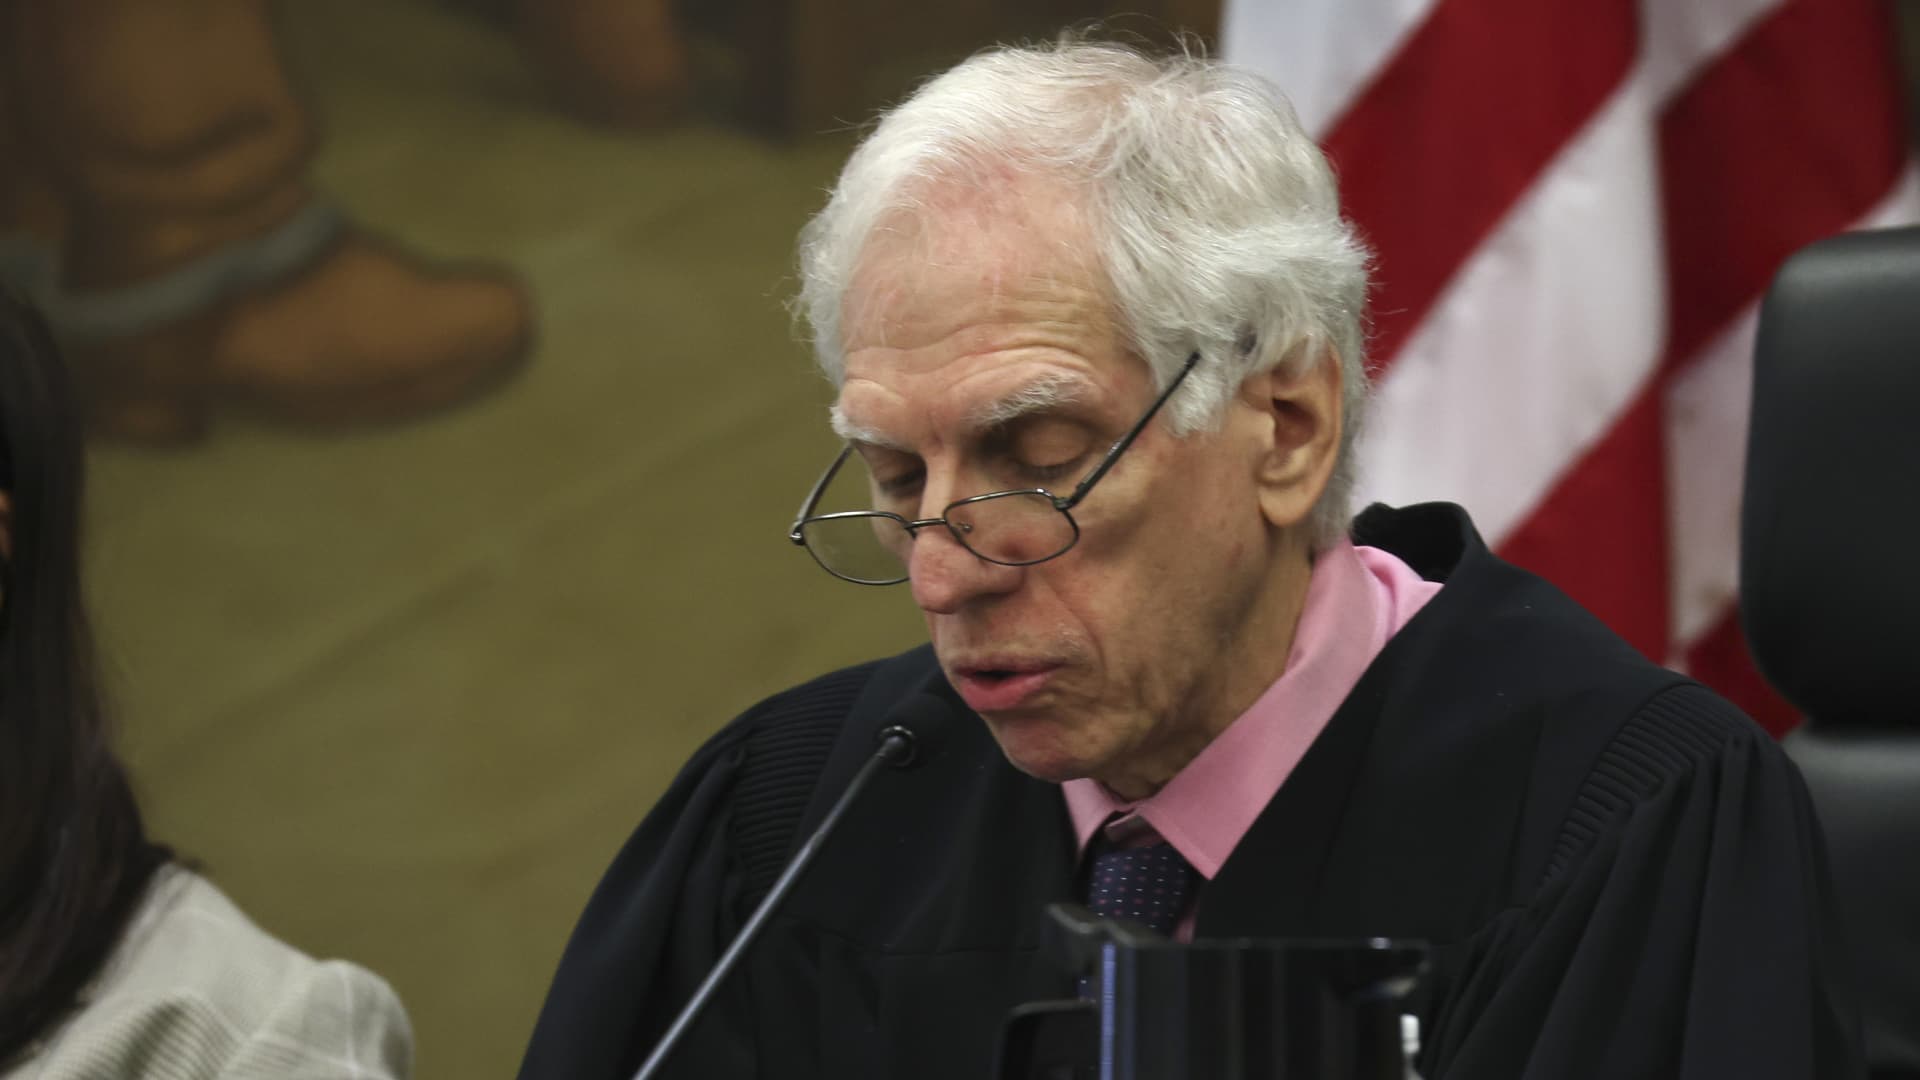 Judge Arthur Engoron speaks during the trial of former U.S. President Donald Trump for Trump's civil fraud trial at New York State Supreme Court in New York City on Oct. 3, 2023.